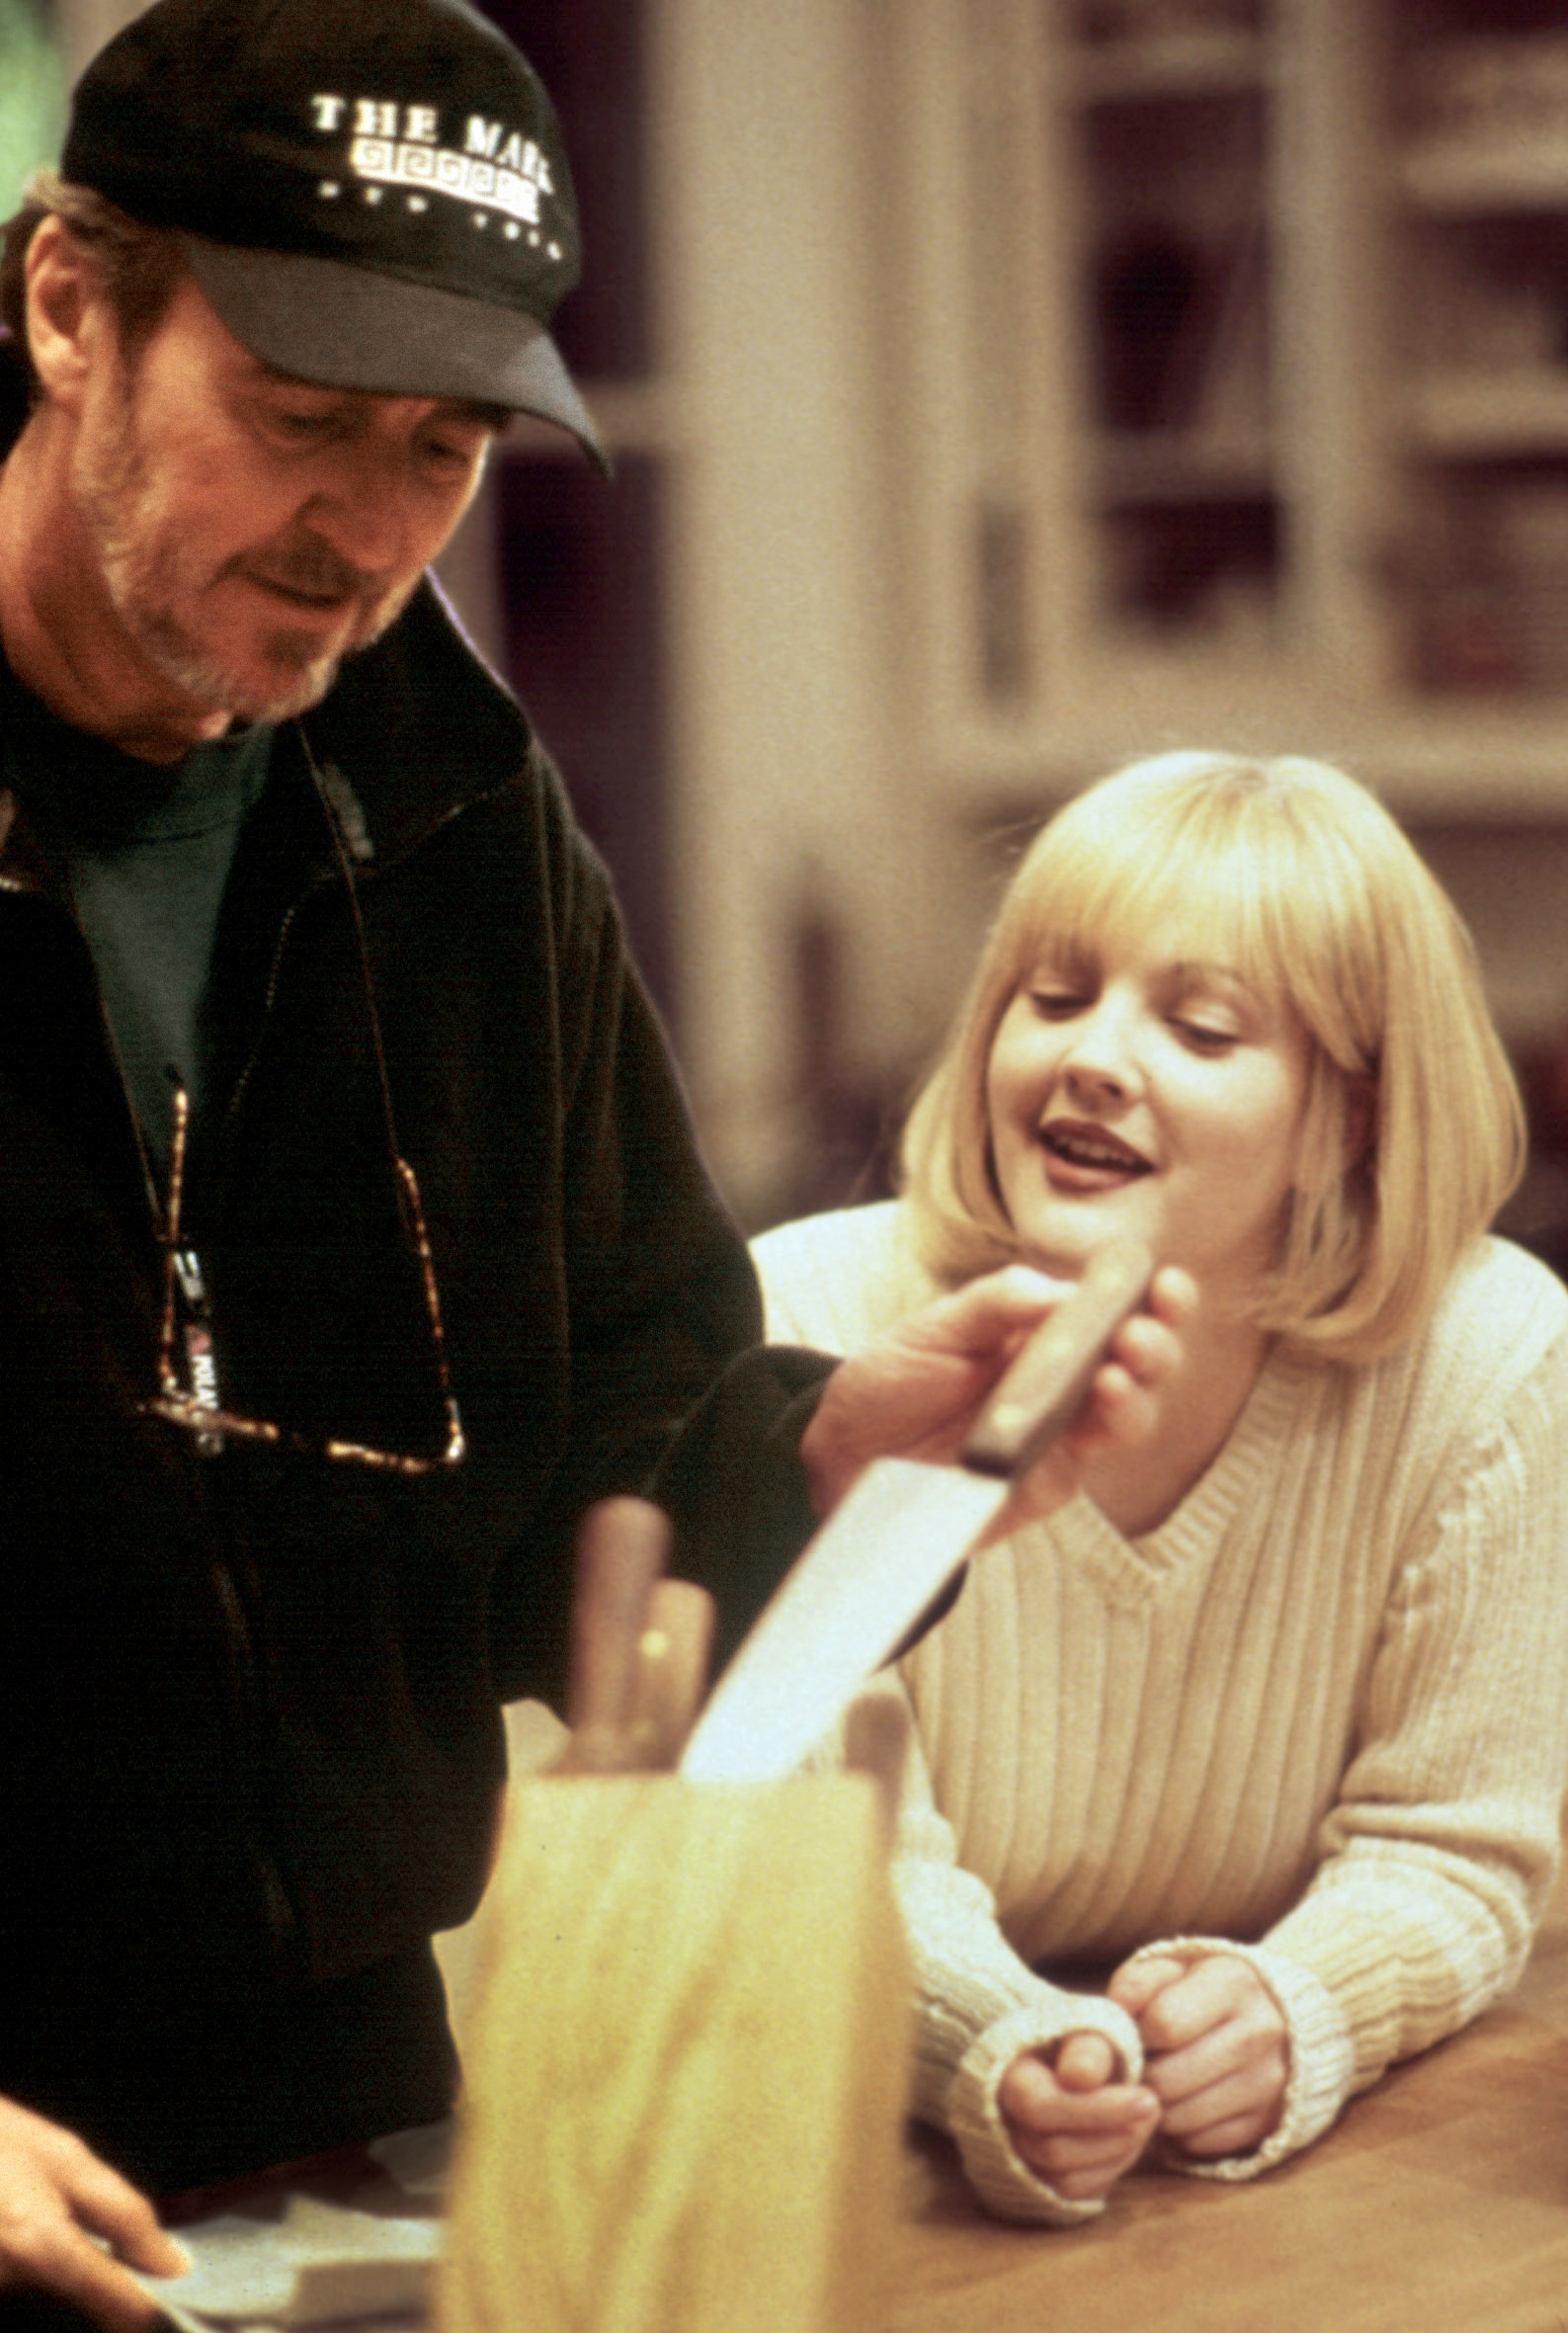 Wes Craven and Drew Barrymore on set